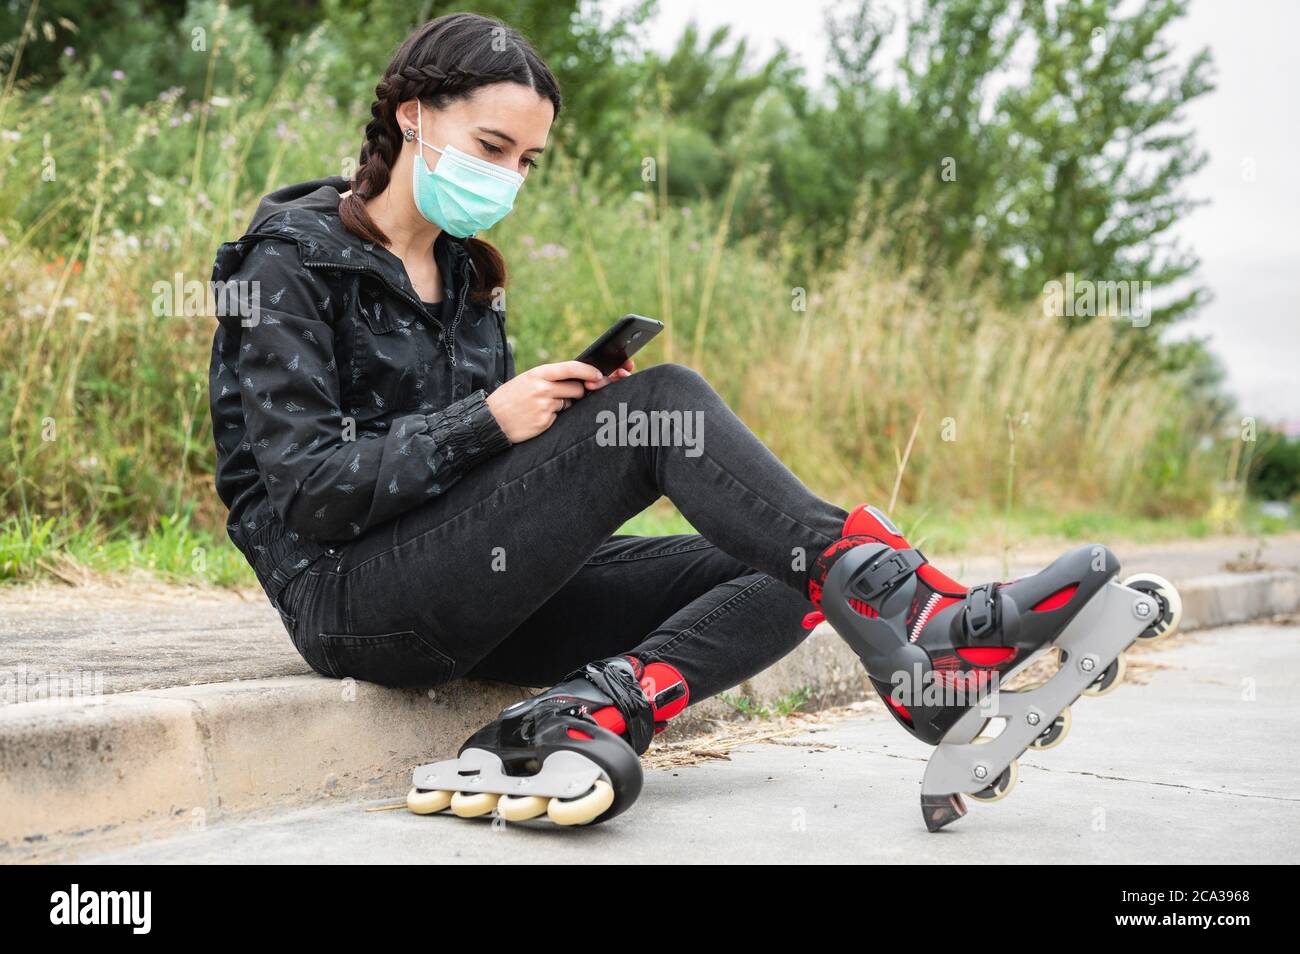 Woman in protective face mask, on roller skating pause, sitting on the street and using mobile phone during coronavirus pandemic outbreak. Urban Girl Stock Photo